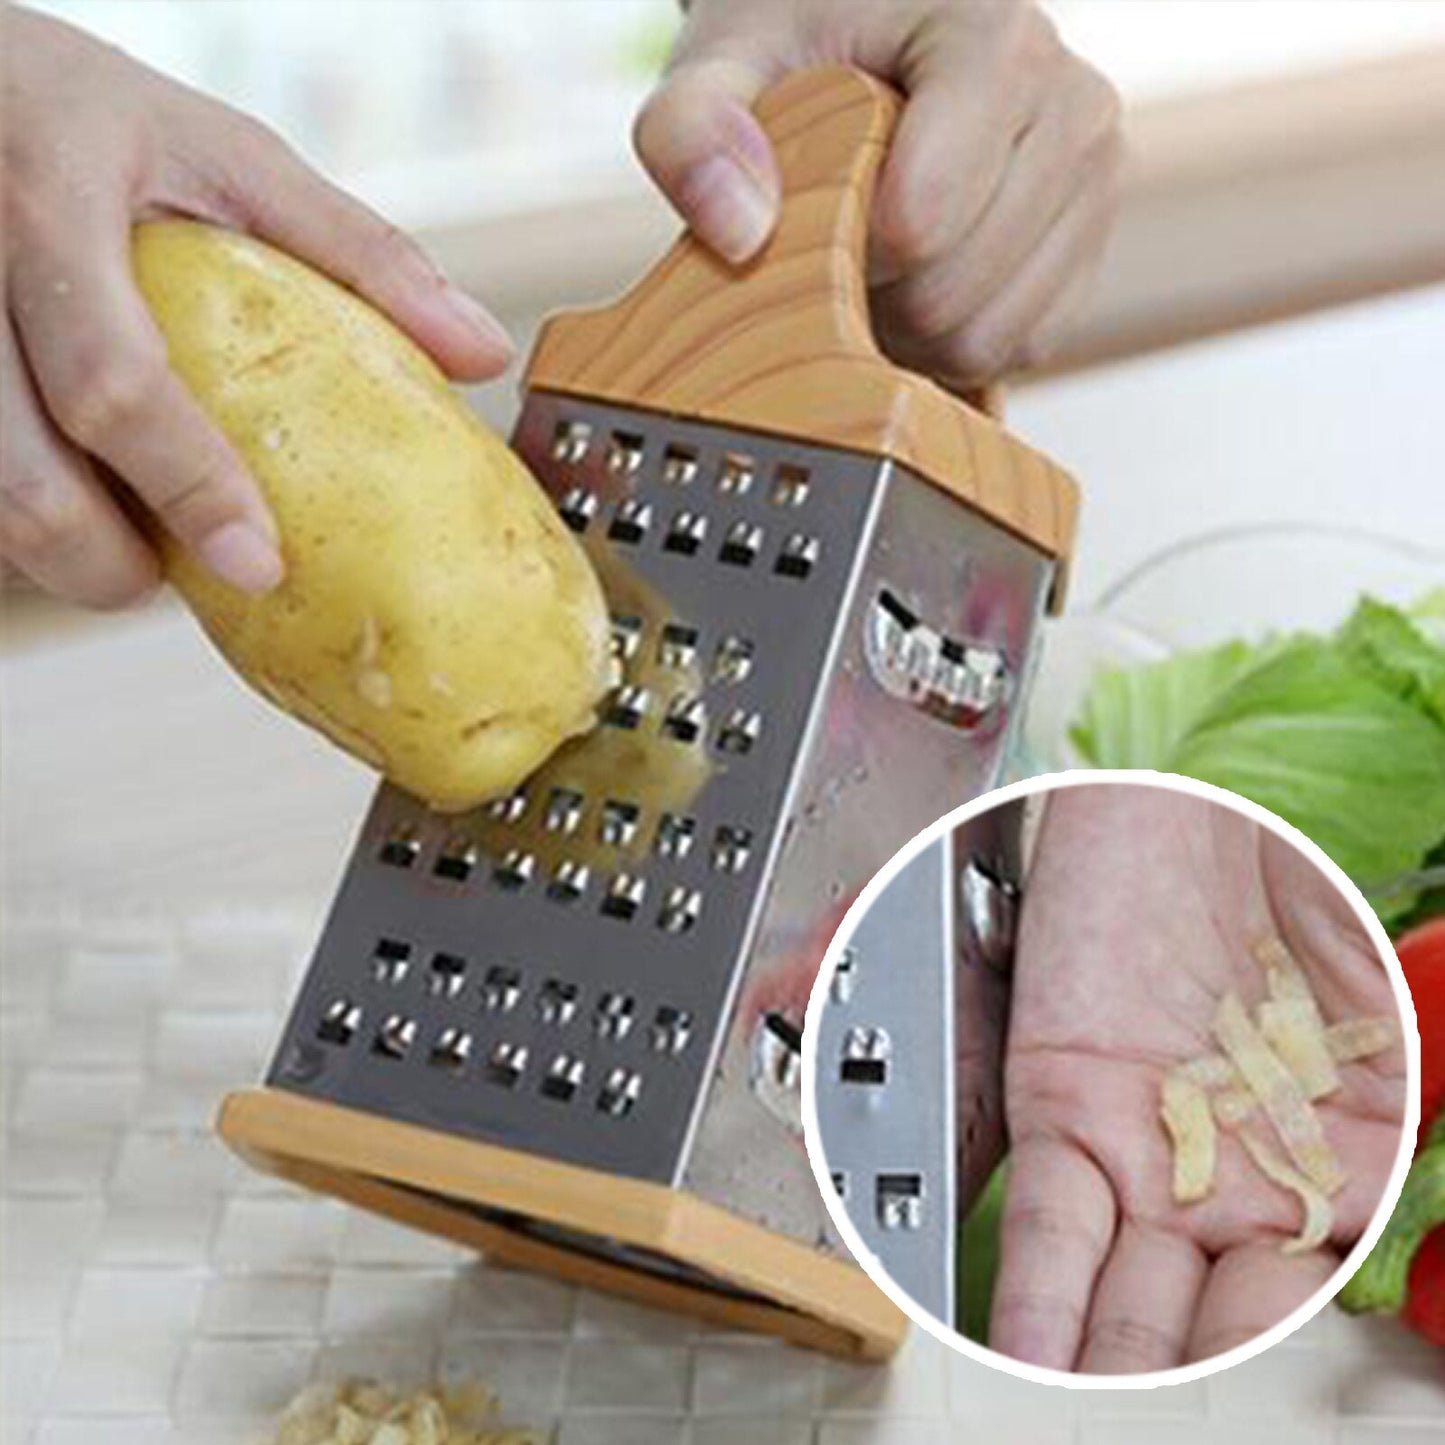 6 Sided Food Grater - Multifuntional 6 Blades Cutter -Stainless Steel